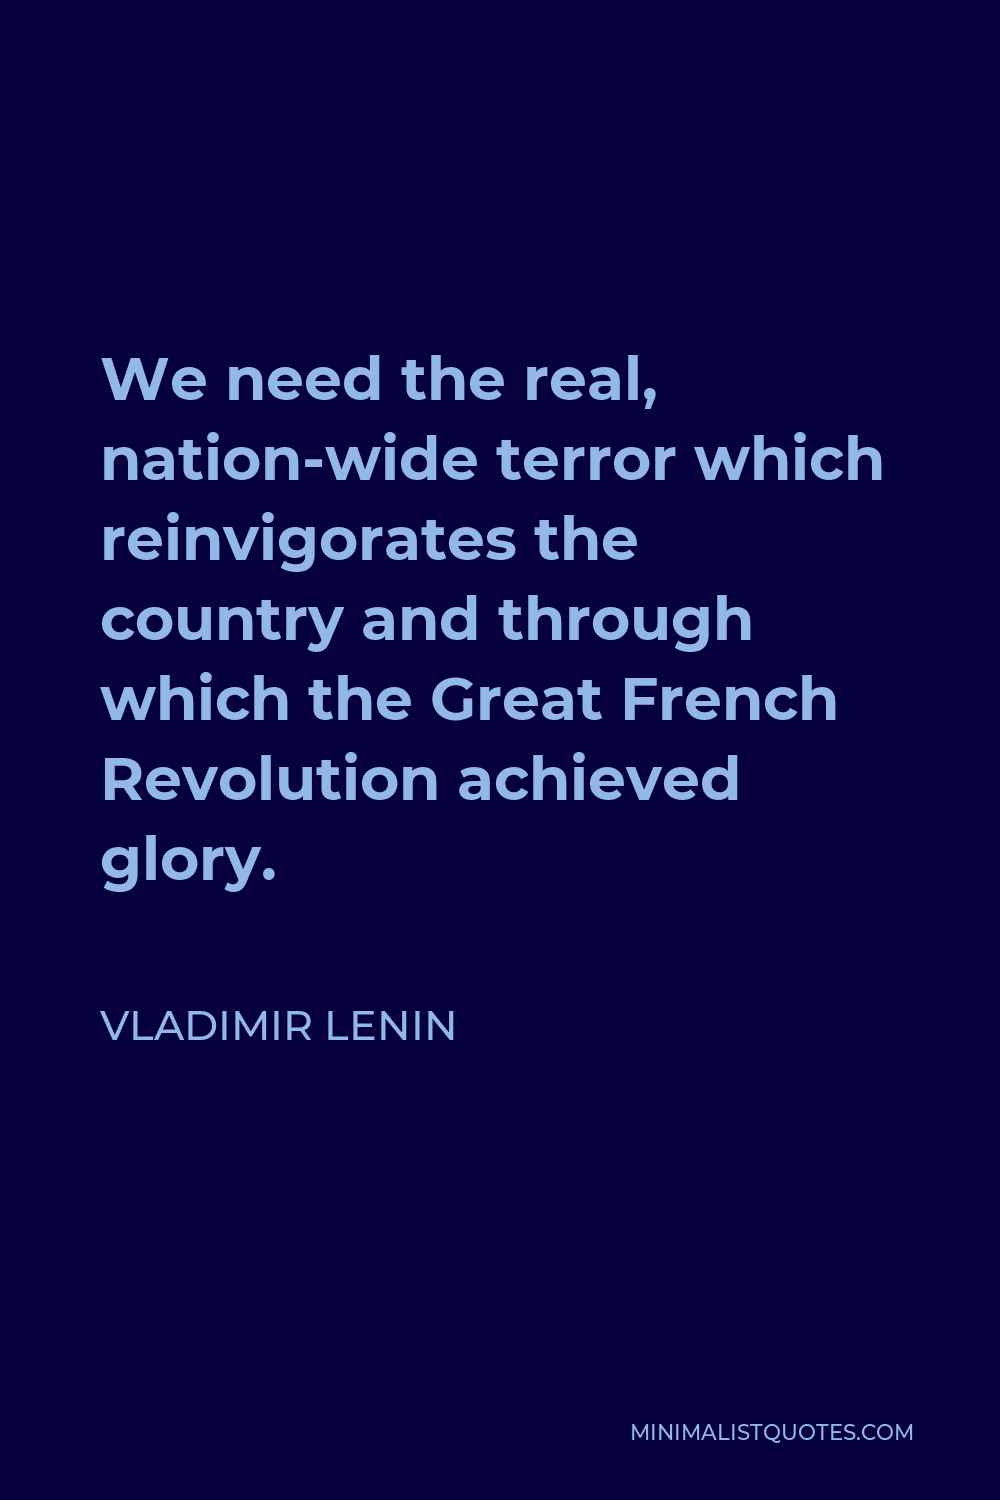 Vladimir Lenin Quote - We need the real, nation-wide terror which reinvigorates the country and through which the Great French Revolution achieved glory.